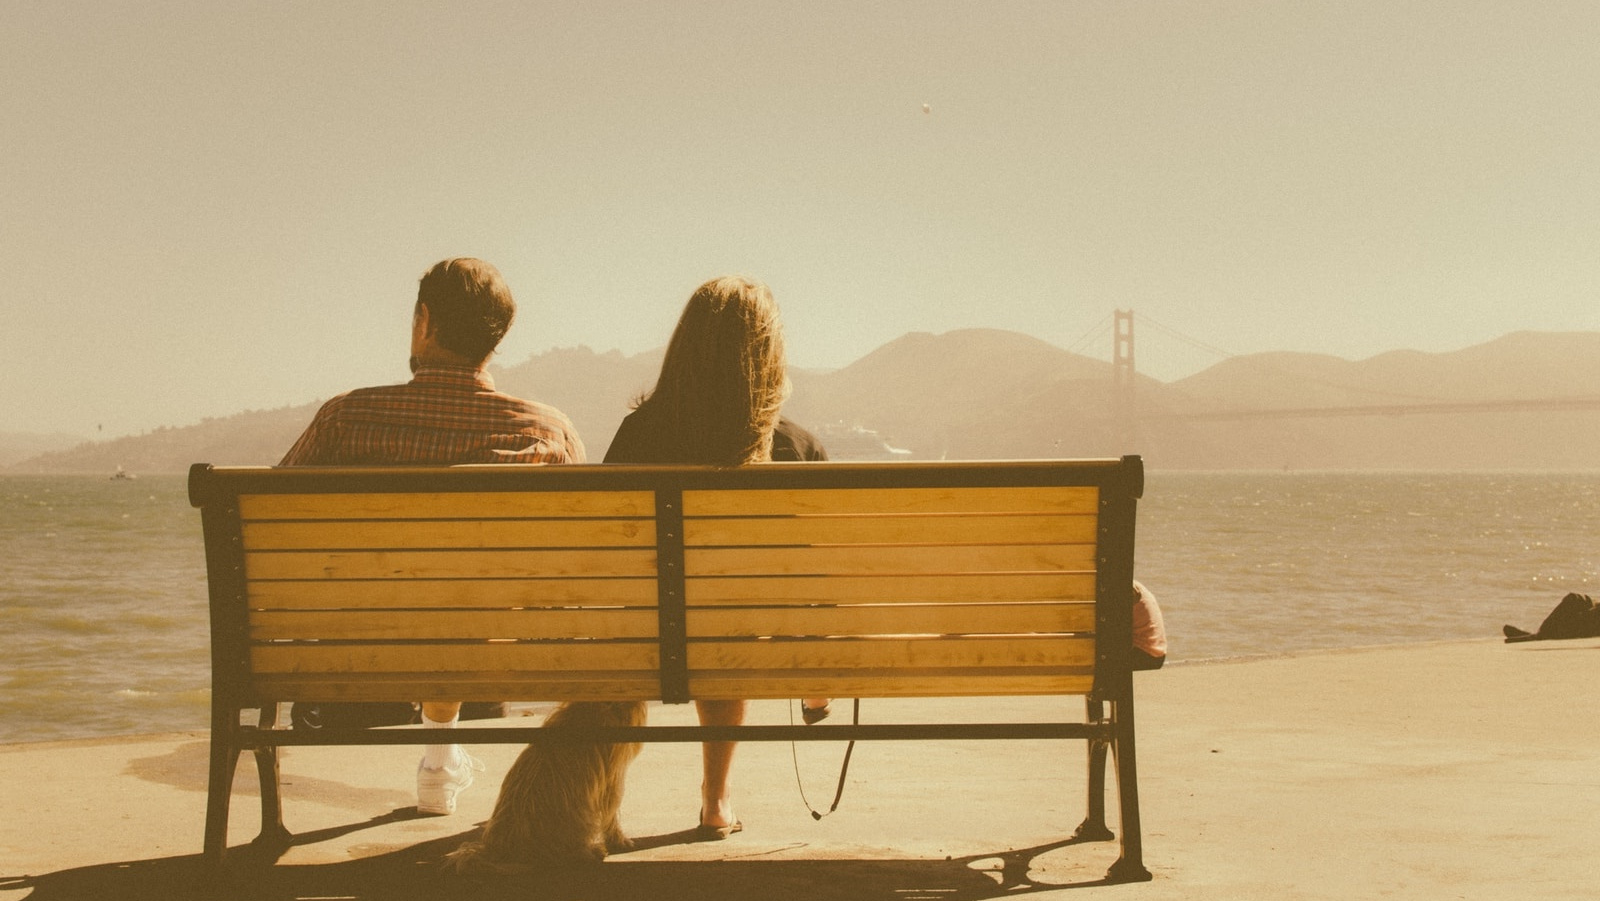 man and woman sitting on bench beside body of water